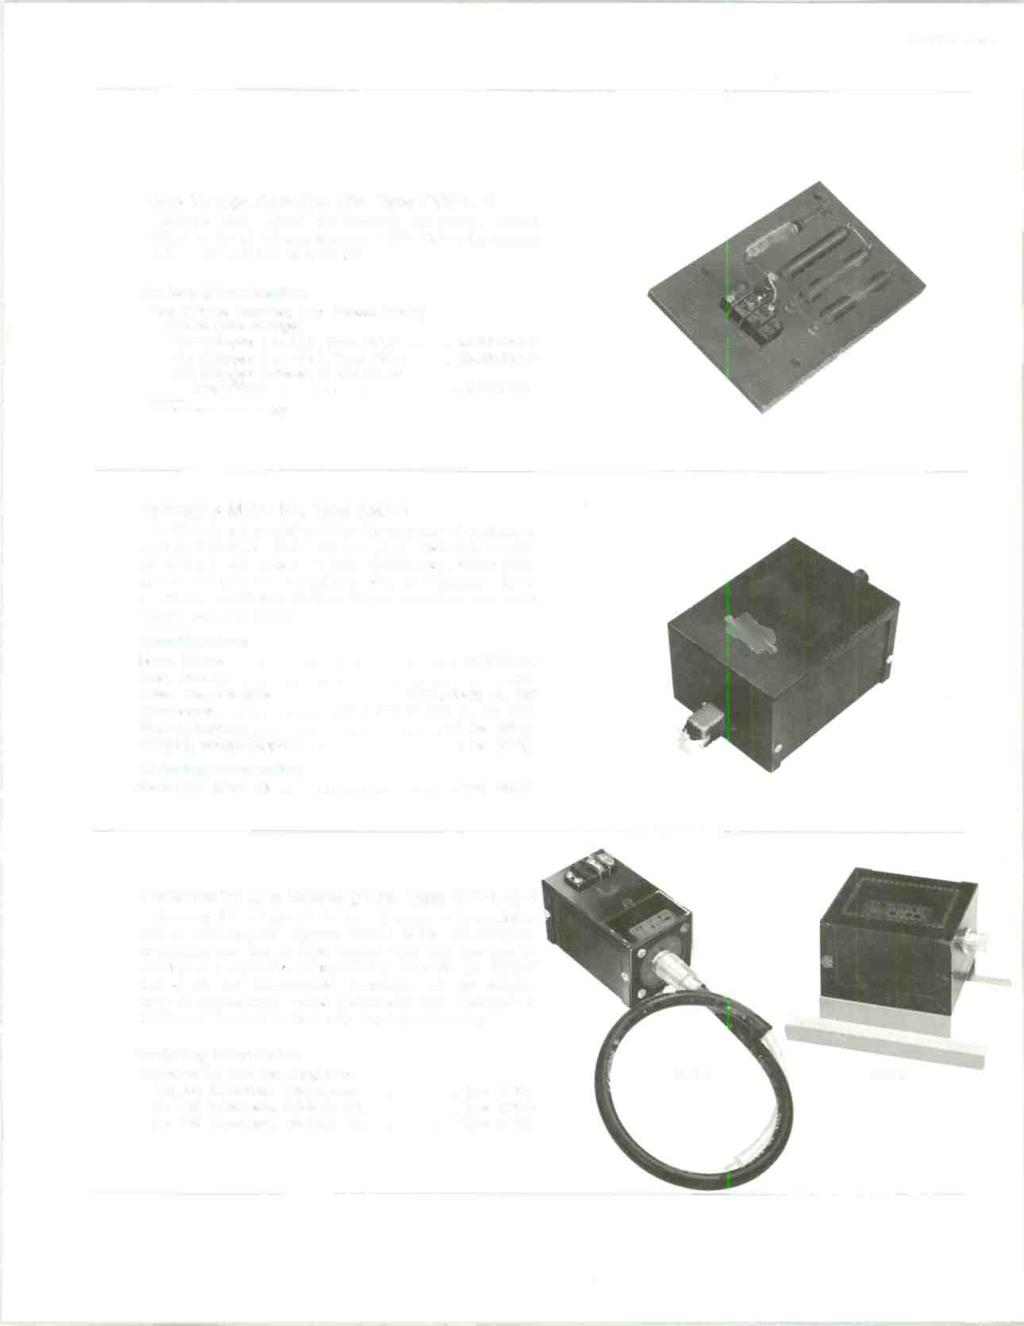 RA.3051B Page 3 Plate Voltage Sampling Kits, Type PVK-1, -2 Samples plate voltage for telemetry via remote control.